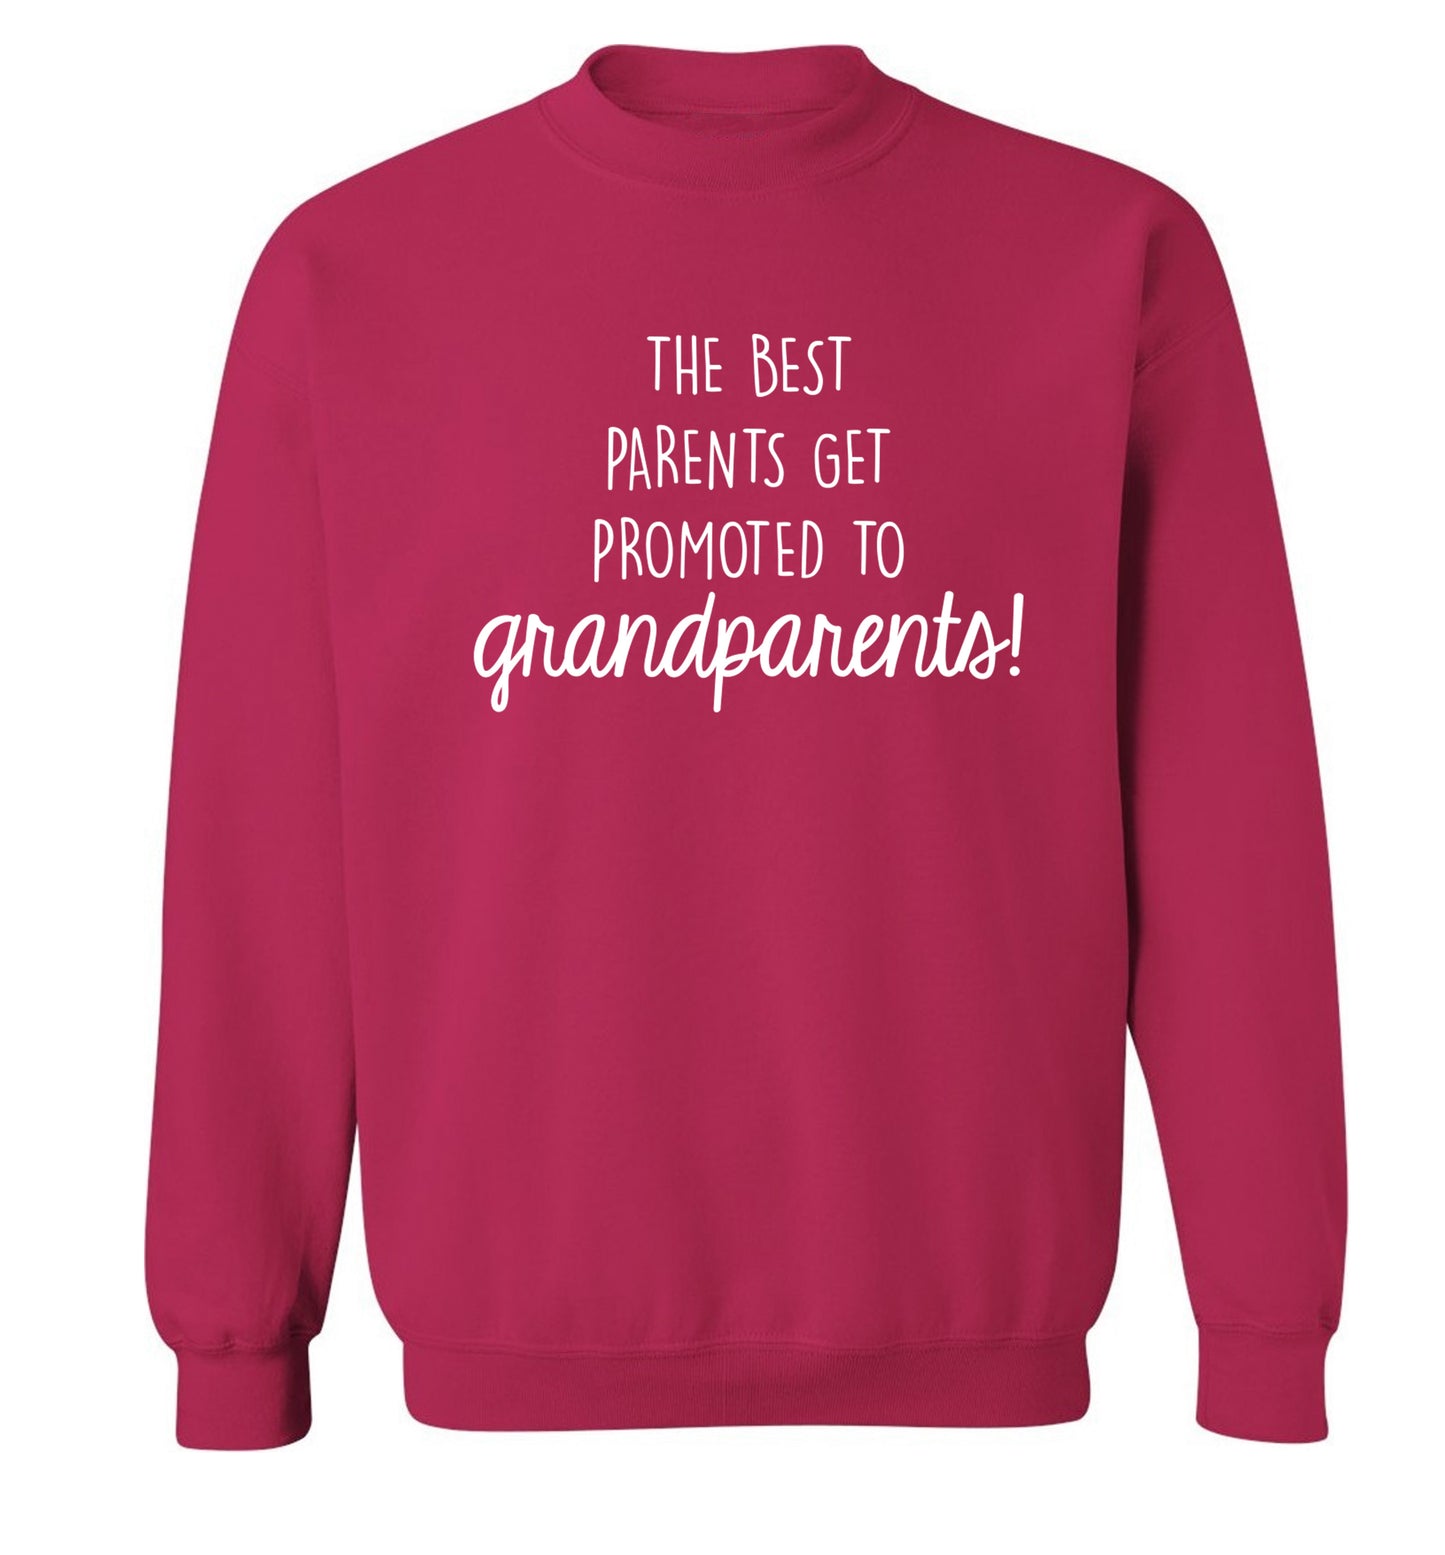 The best parents get promoted to grandparents Adult's unisex pink Sweater 2XL